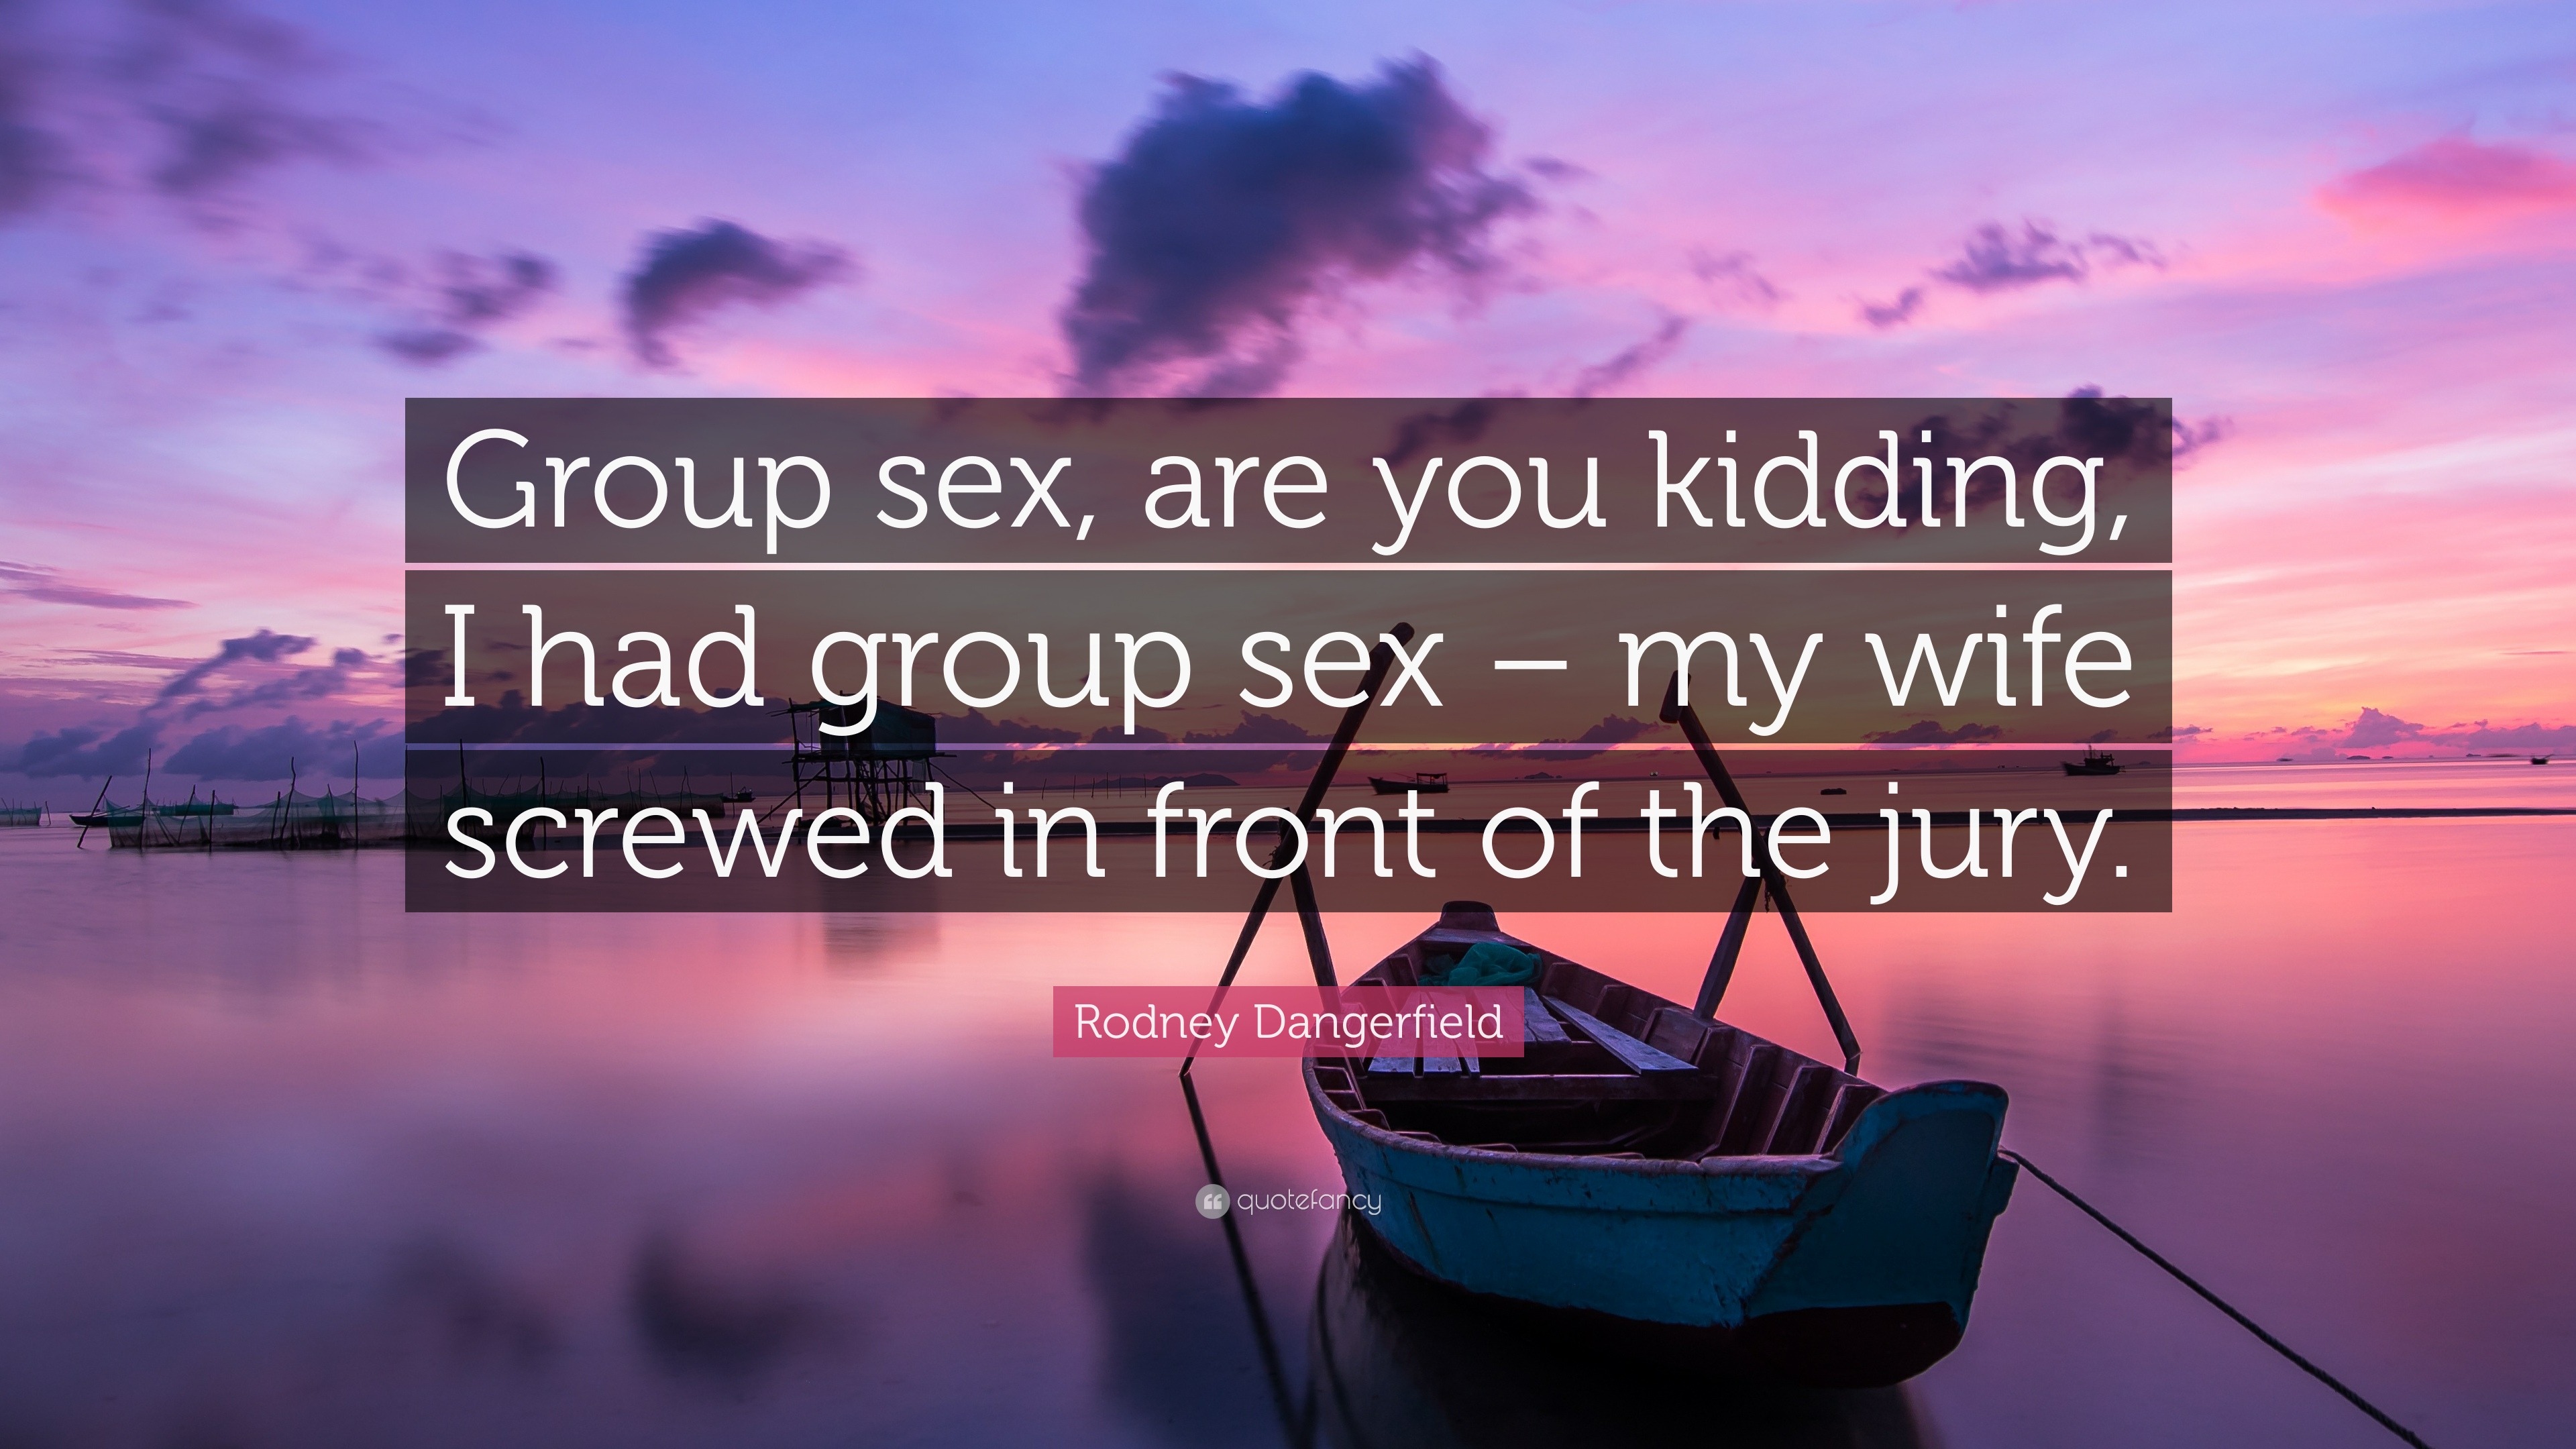 Rodney Dangerfield Quote �Group sex, are you kidding, I had group sex ...